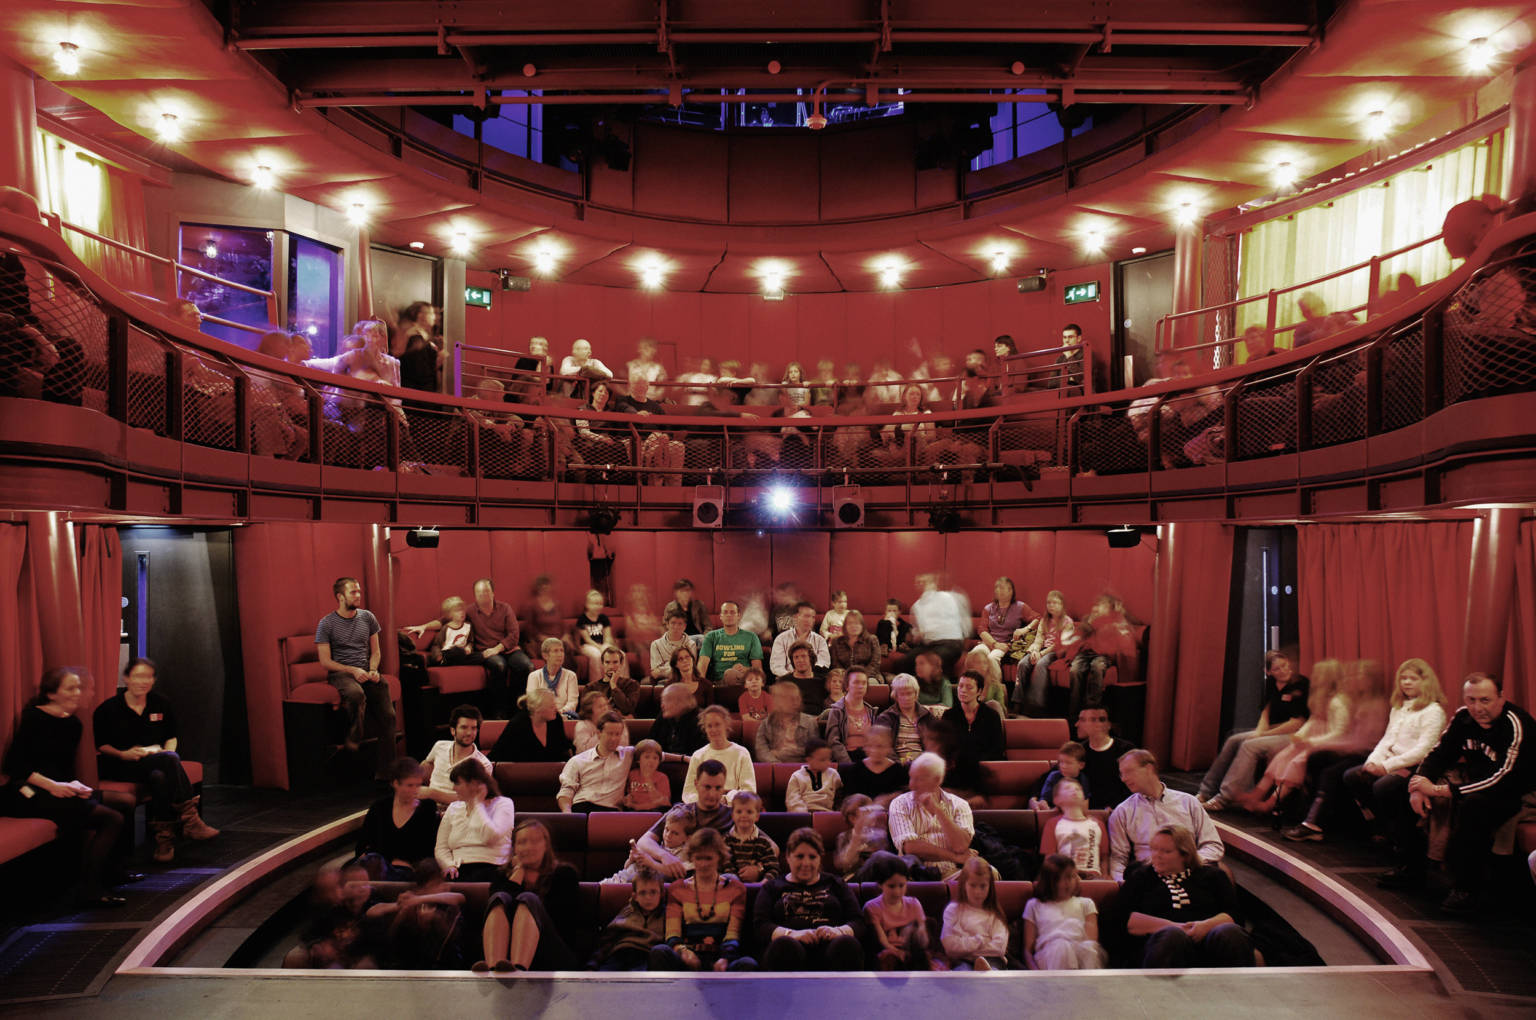 A packed audience inside The Egg Theatre